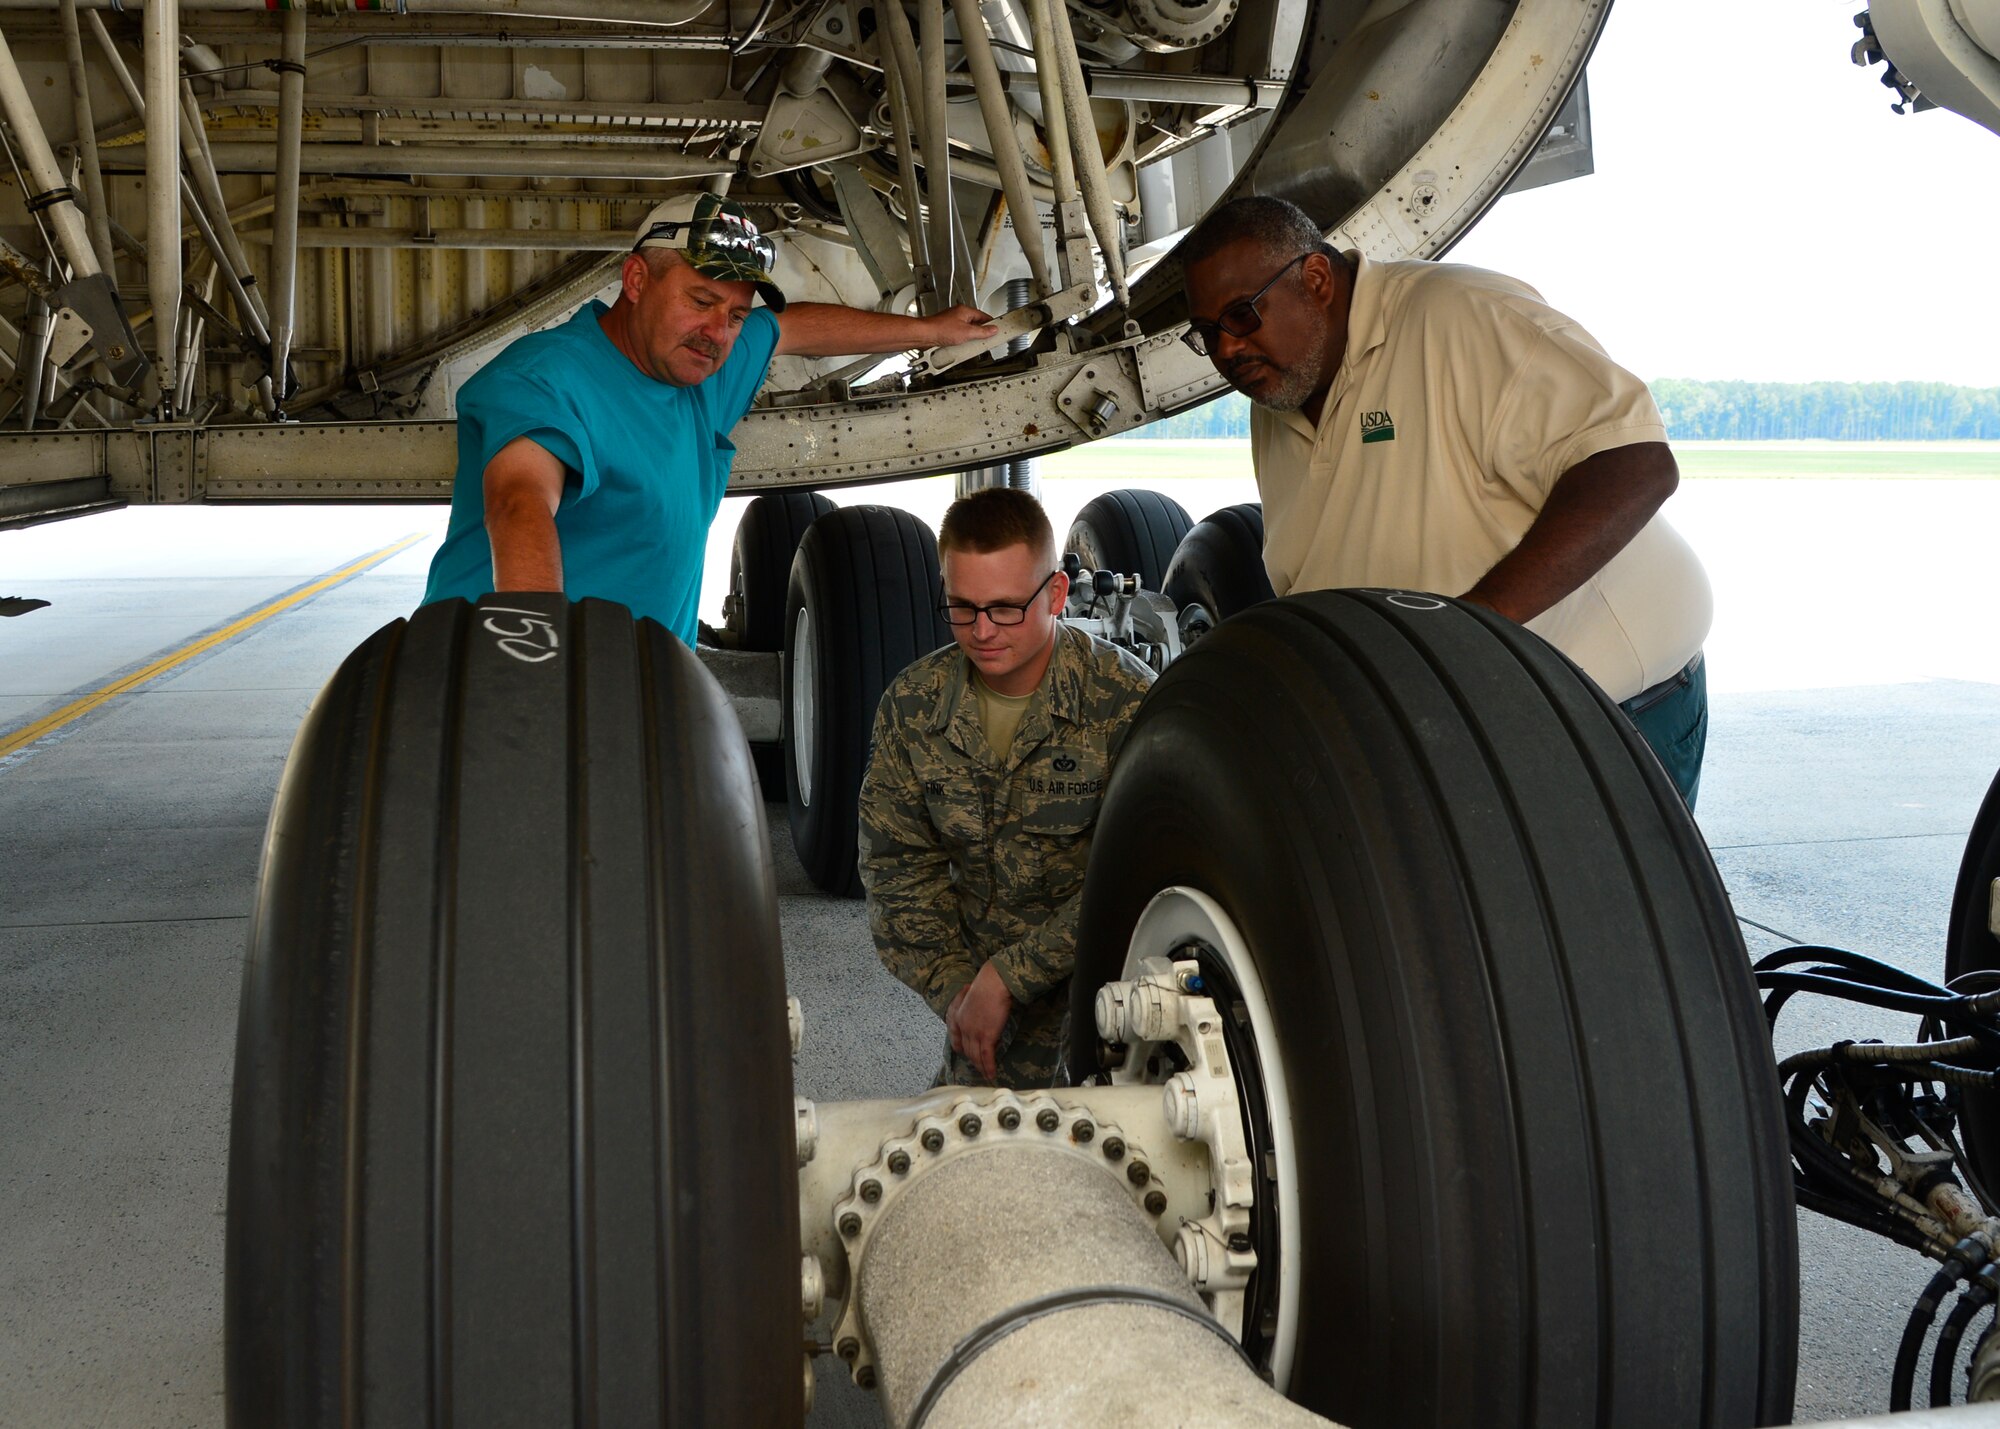 Ken Barnes, 436th Civil Engineer Squadron Pest Management foreman, left, Staff Sgt. Daniel Fink, 436th CES Pest Management supervisor, middle, and Darryl Moore, U.S. Department of Agriculture Plant Health Safe Guarding specialist, right, inspect the landing gear of a C-5M Super Galaxy for Japanese Beetles July 1, 2015, at Dover Air Force Base, Del. The 436th Pest Management shop treats aircraft departing Dover AFB and traveling to one of the nine protected western states against Japanese Beetles as part of a USDA mandated program. (U.S. Air Force photo/Airman 1st Class William Johnson)